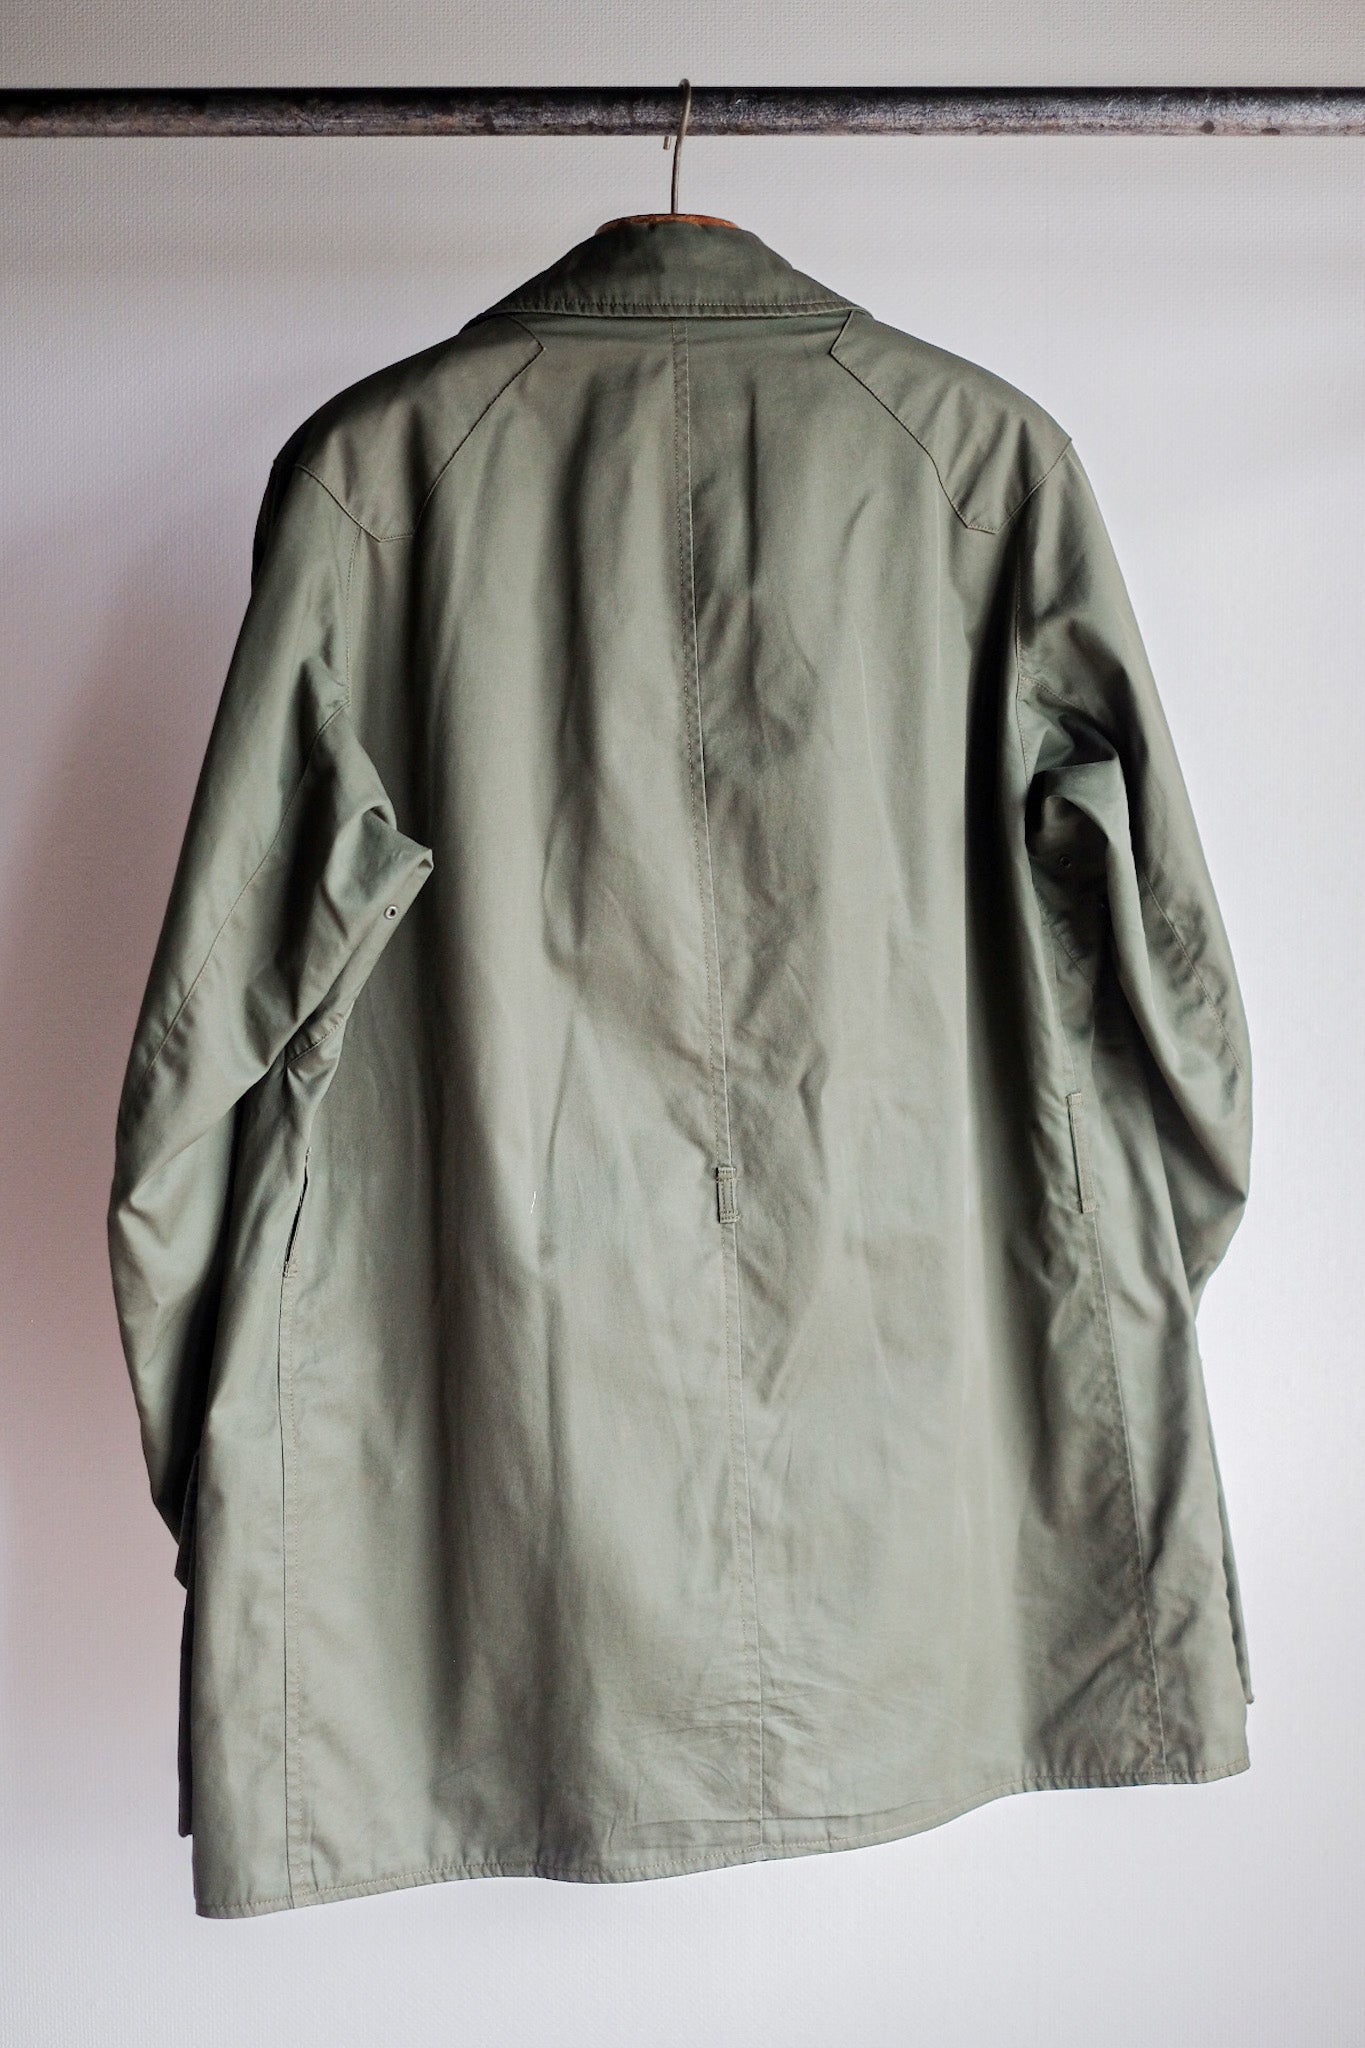 [~ 60's] Vintage Grenfell Shooter Jacket “Mountain Tag”